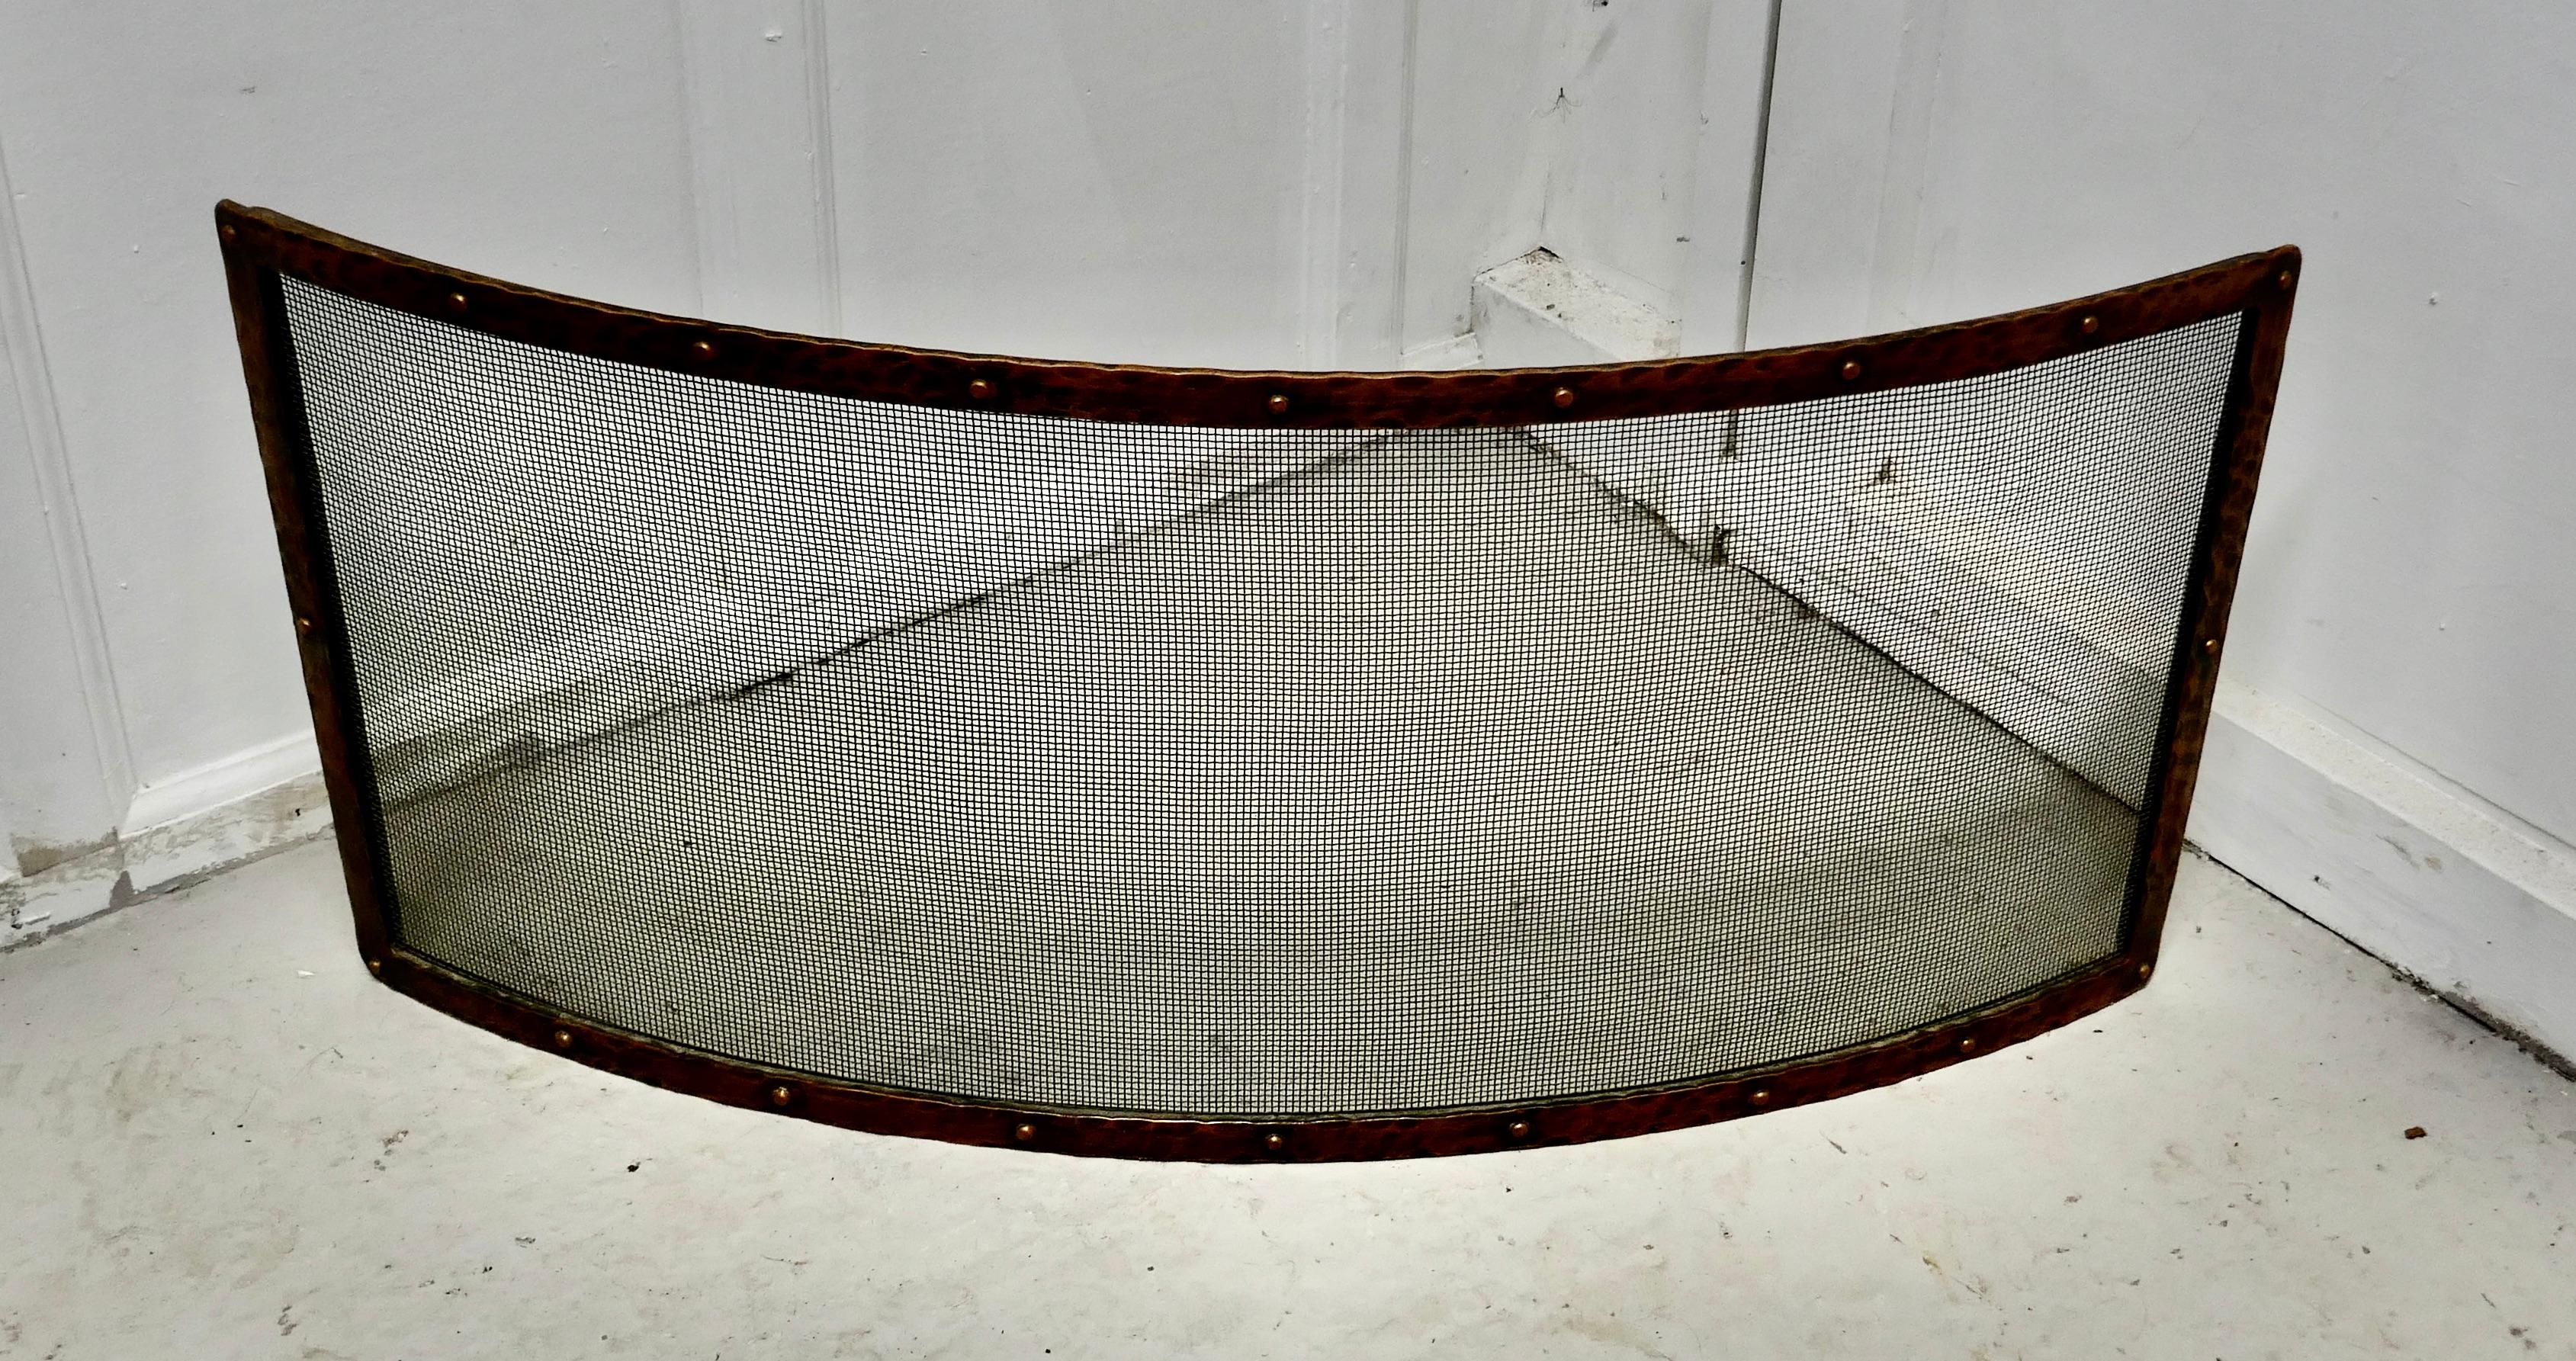 Victorian Arts & Crafts beaten copper curved fire guard, spark screen

The fire guard is a very stylized good quality piece it is made in beaten copper with a fine mesh screen, it is a very unusual but very sensible curved shape.
A delightful